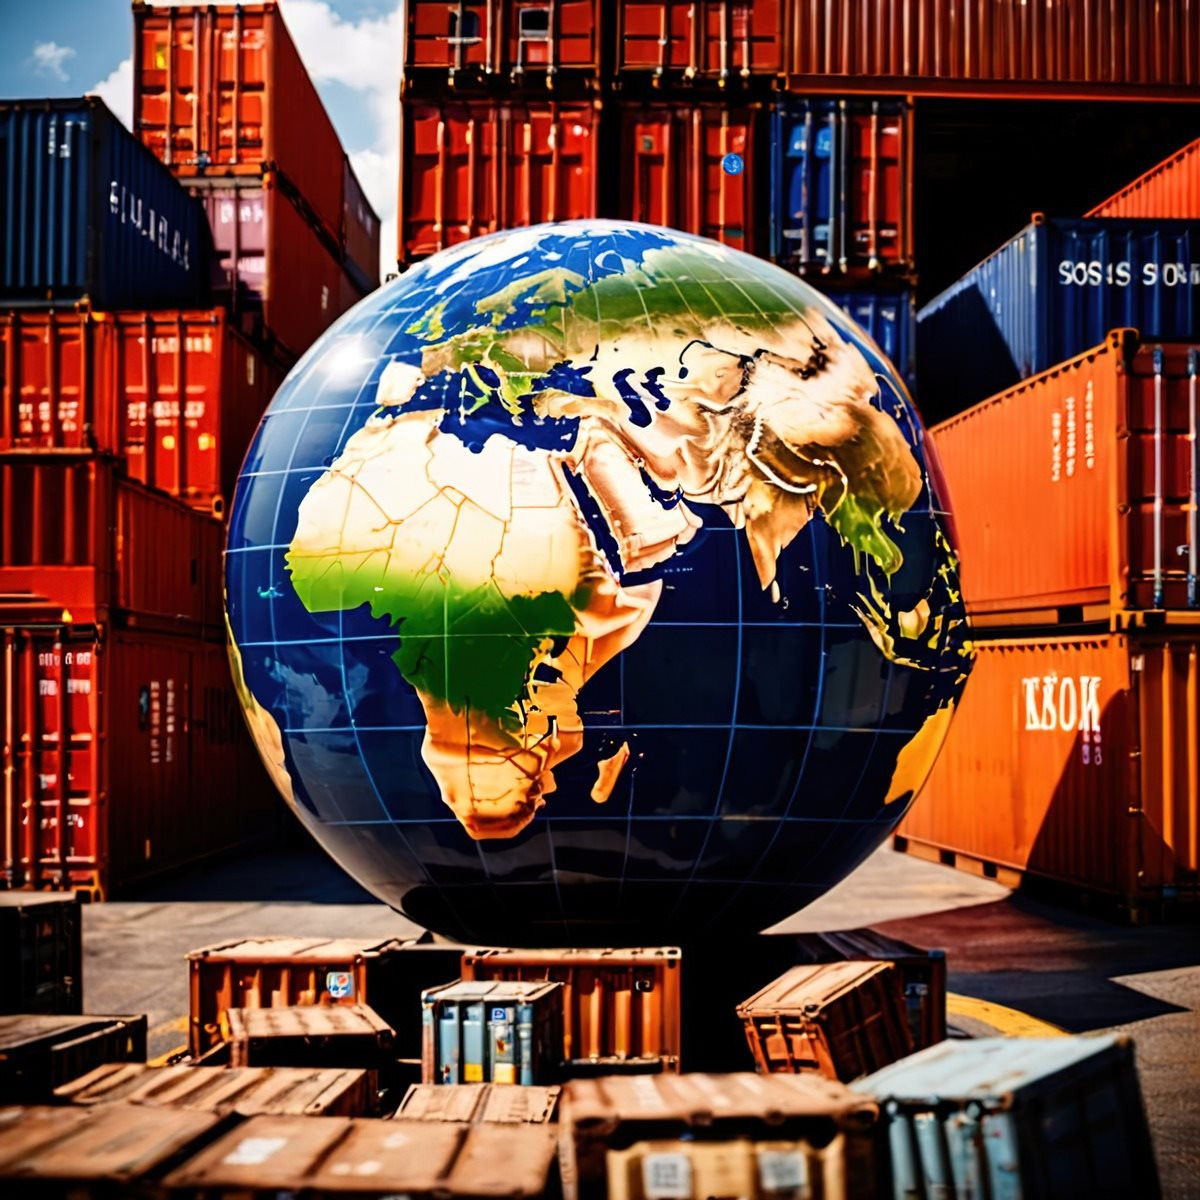 global-international-logistics-delivery-shown-by-globe-surrounded-by-cargo-containers-1-1-.jpg